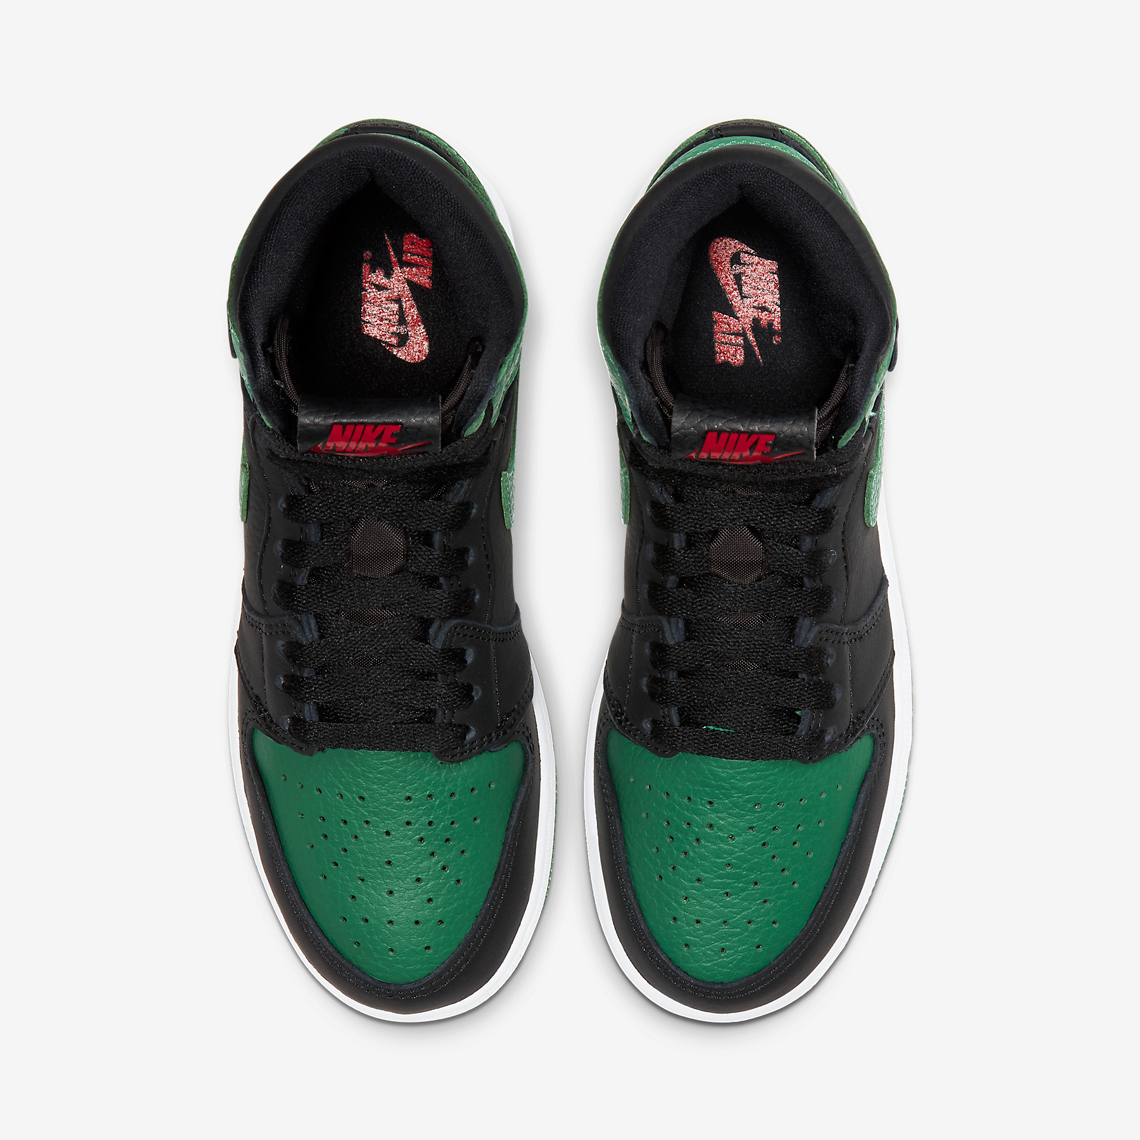 You can buy the Air Jordan 11 Black Red Bred from the legitimate sellers in the listings below Pine Green Gs 575441 030 4